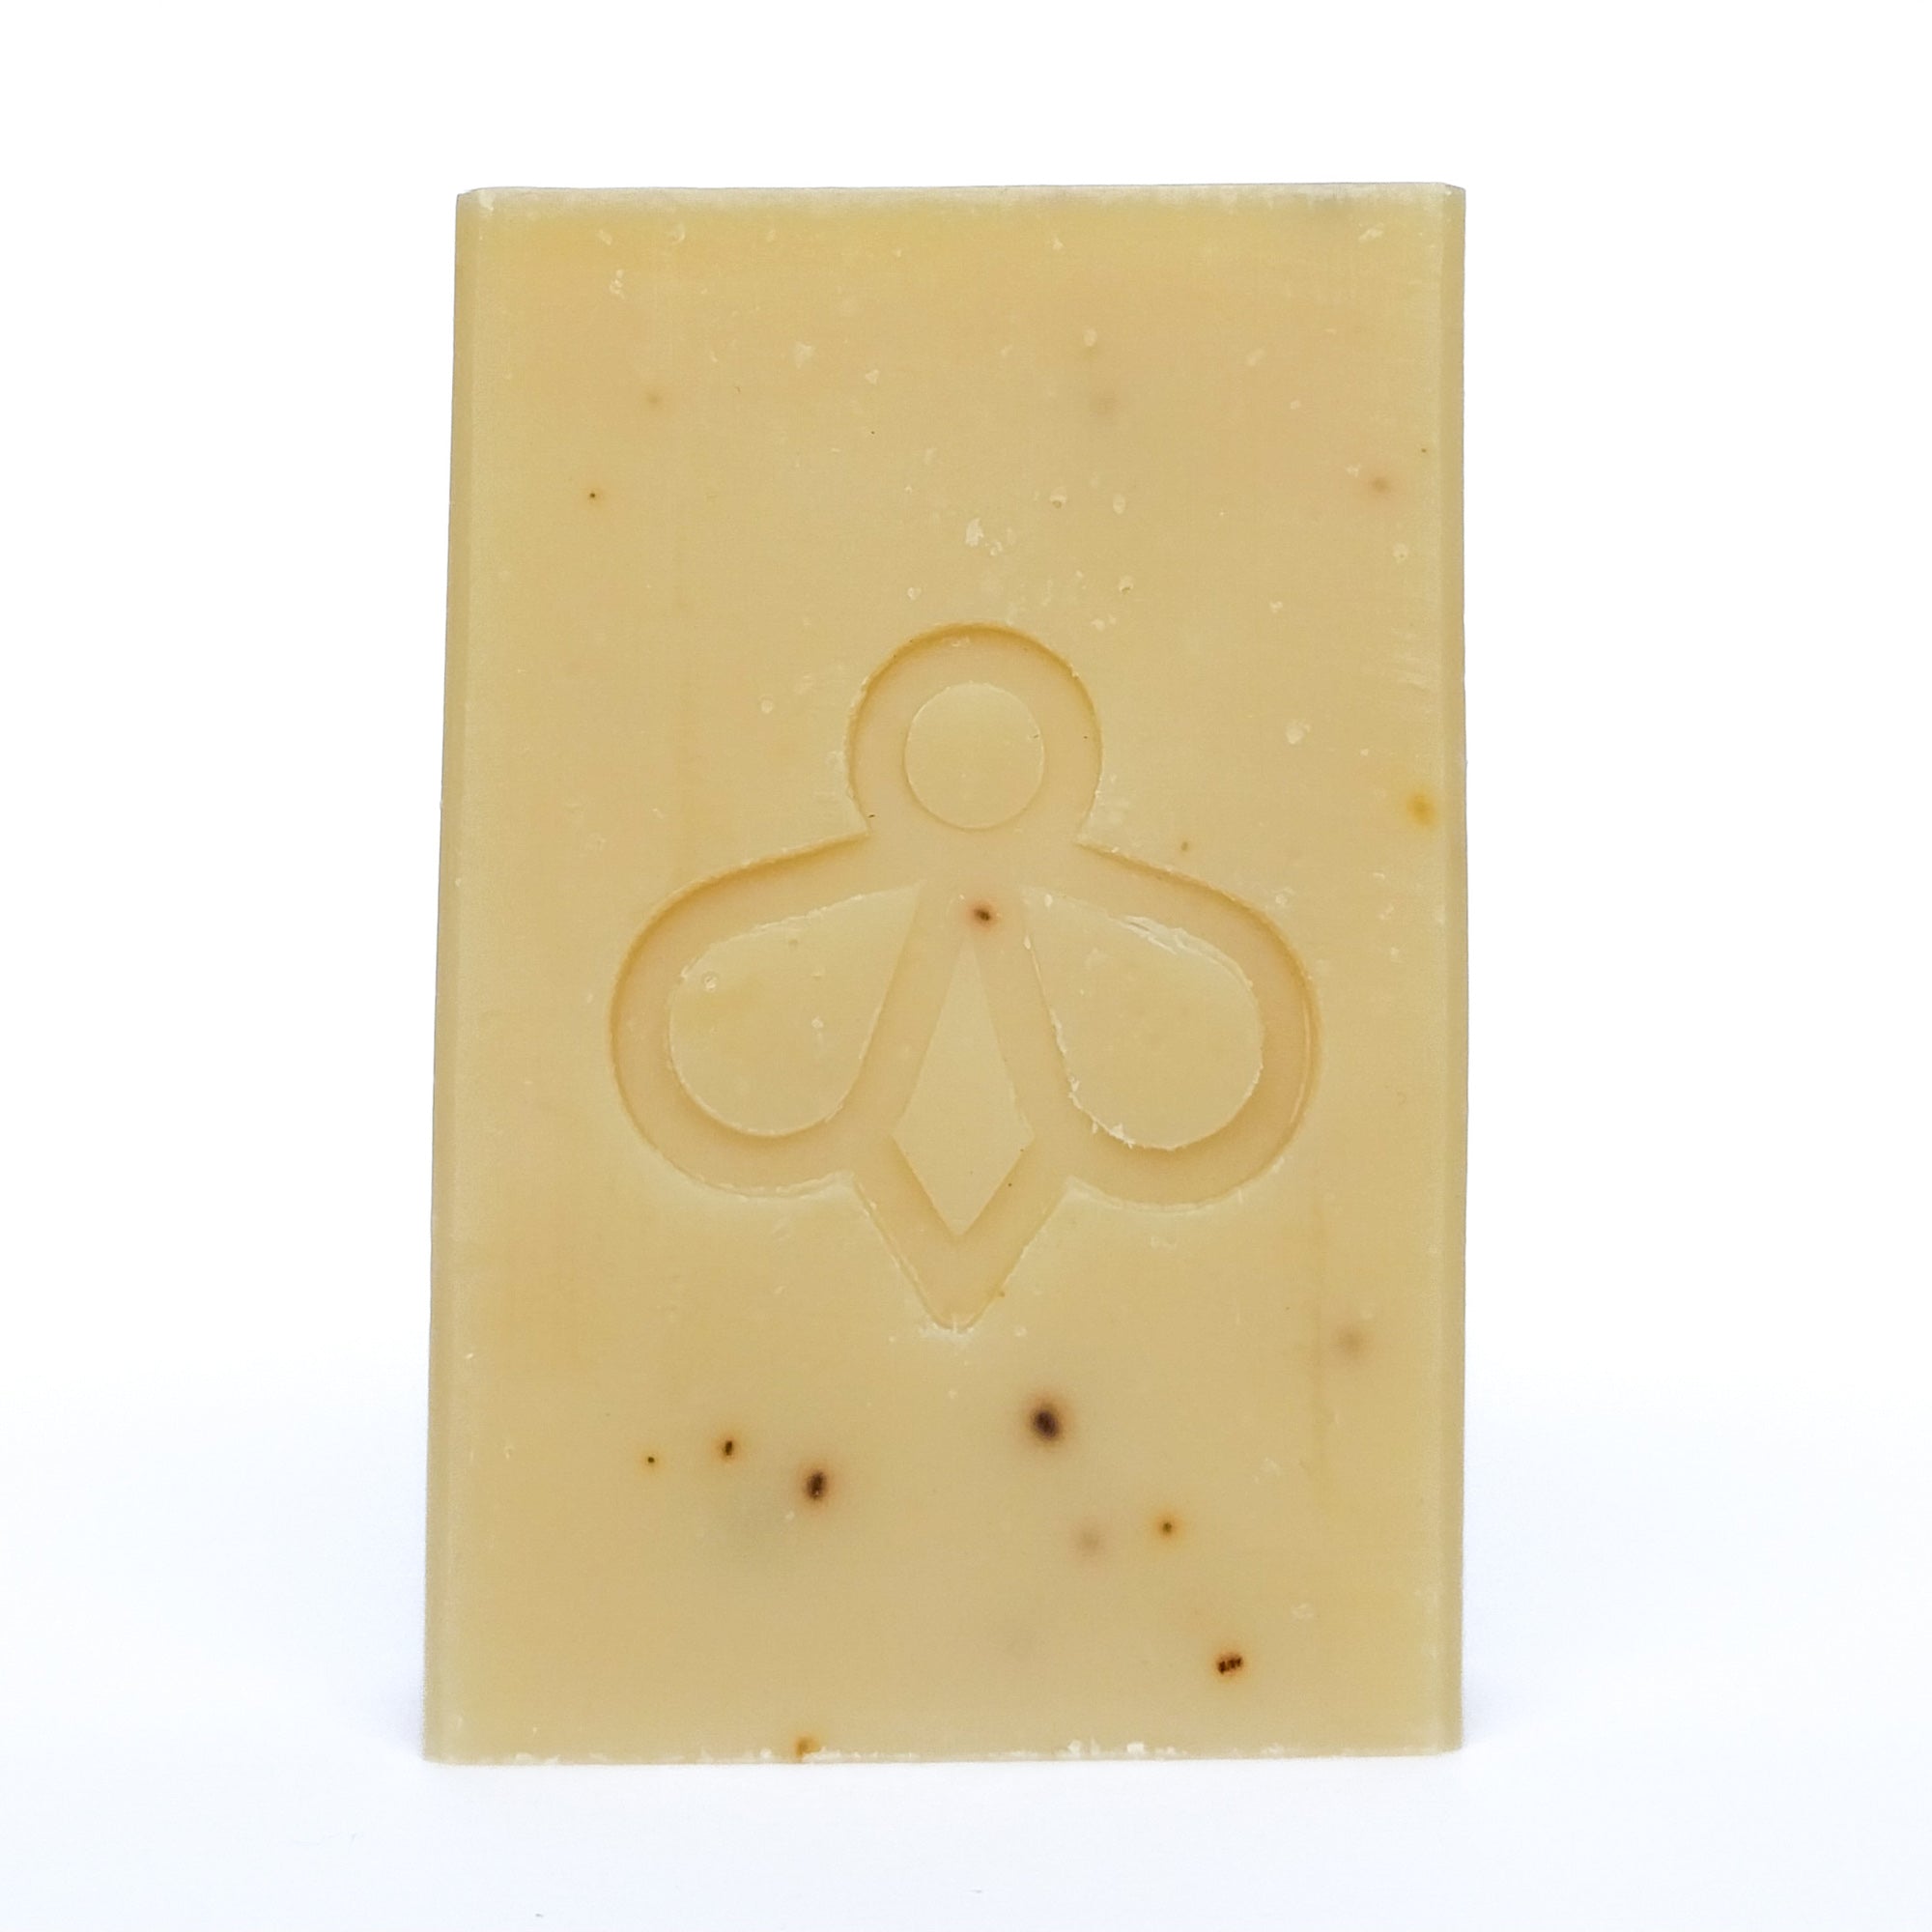 Lavender and Goat’s Milk Soap - A creamy-coloured bar with black speckles, featuring our bee imprint, displayed against a clean white background. Immerse yourself in the soothing blend of lavender and goat’s milk for a gentle and nourishing bathing experience.